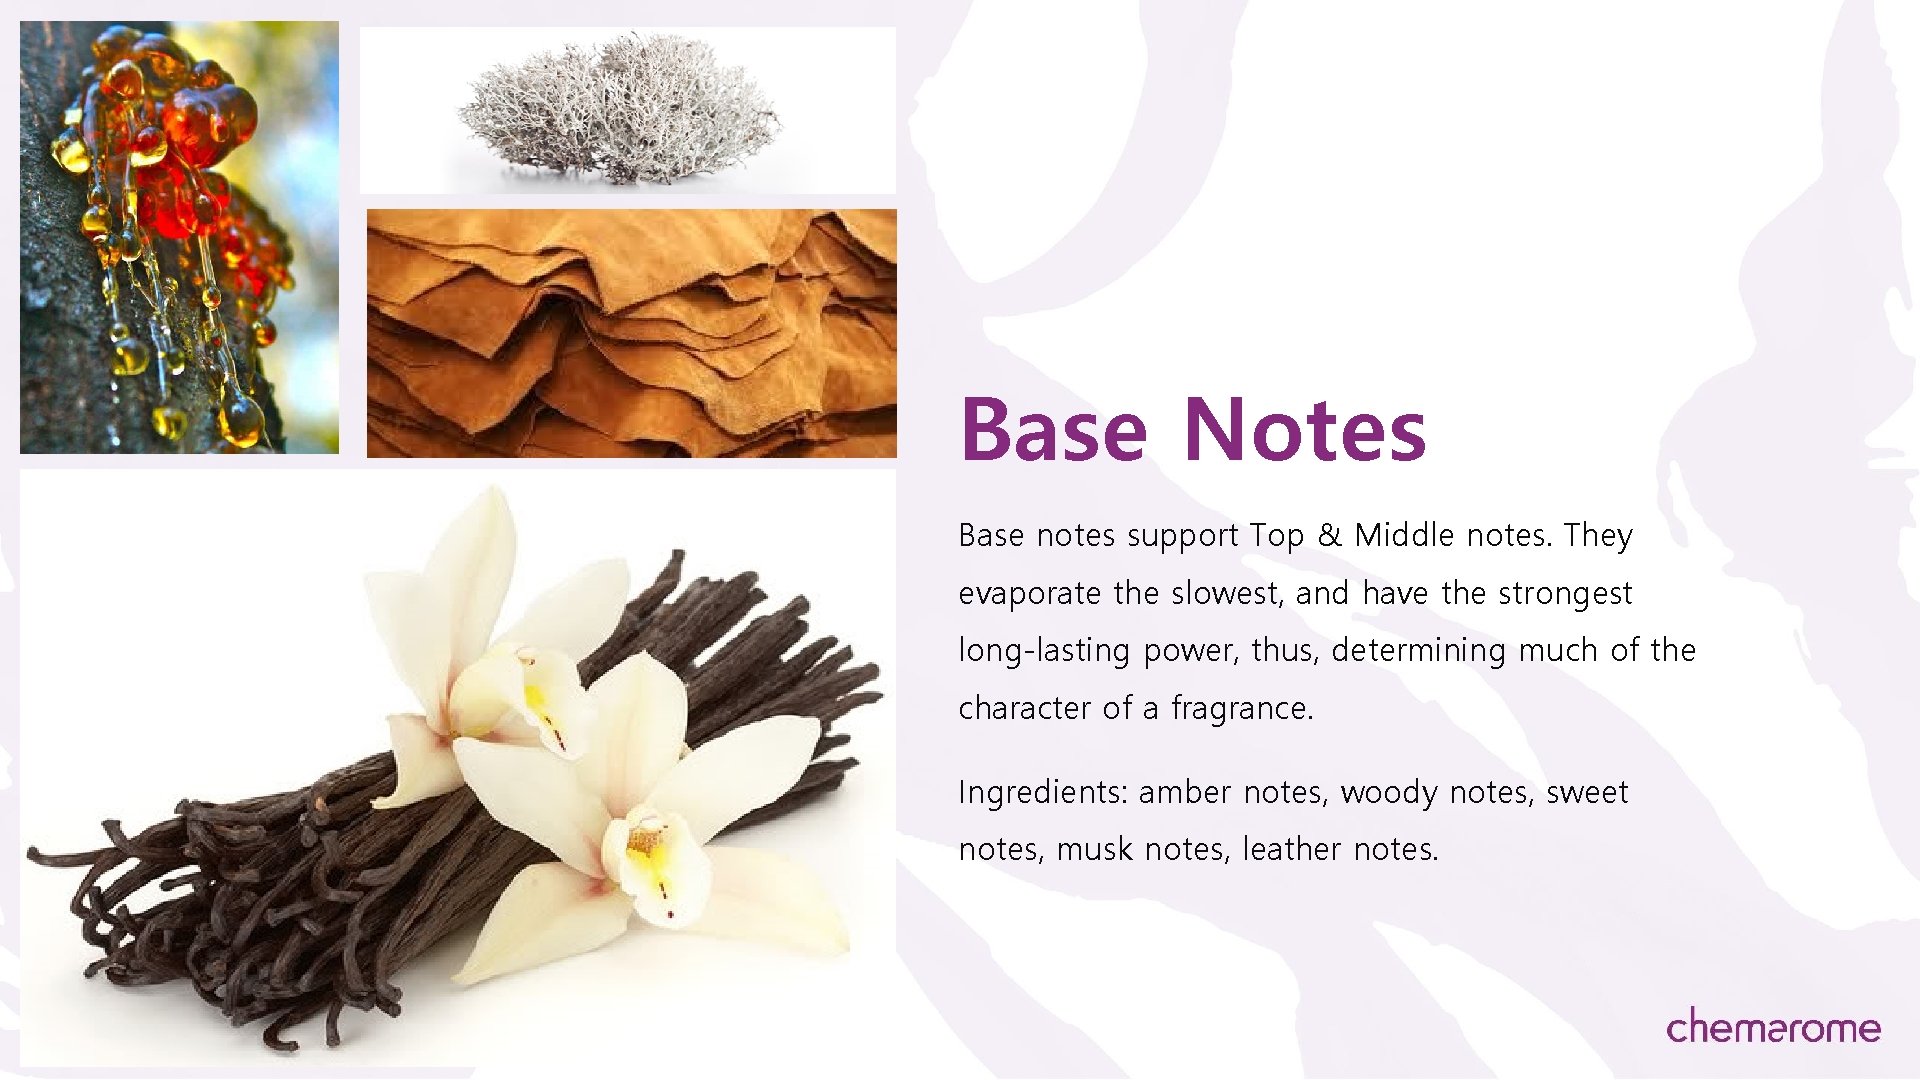 Base Notes Base notes support Top & Middle notes. They evaporate the slowest, and